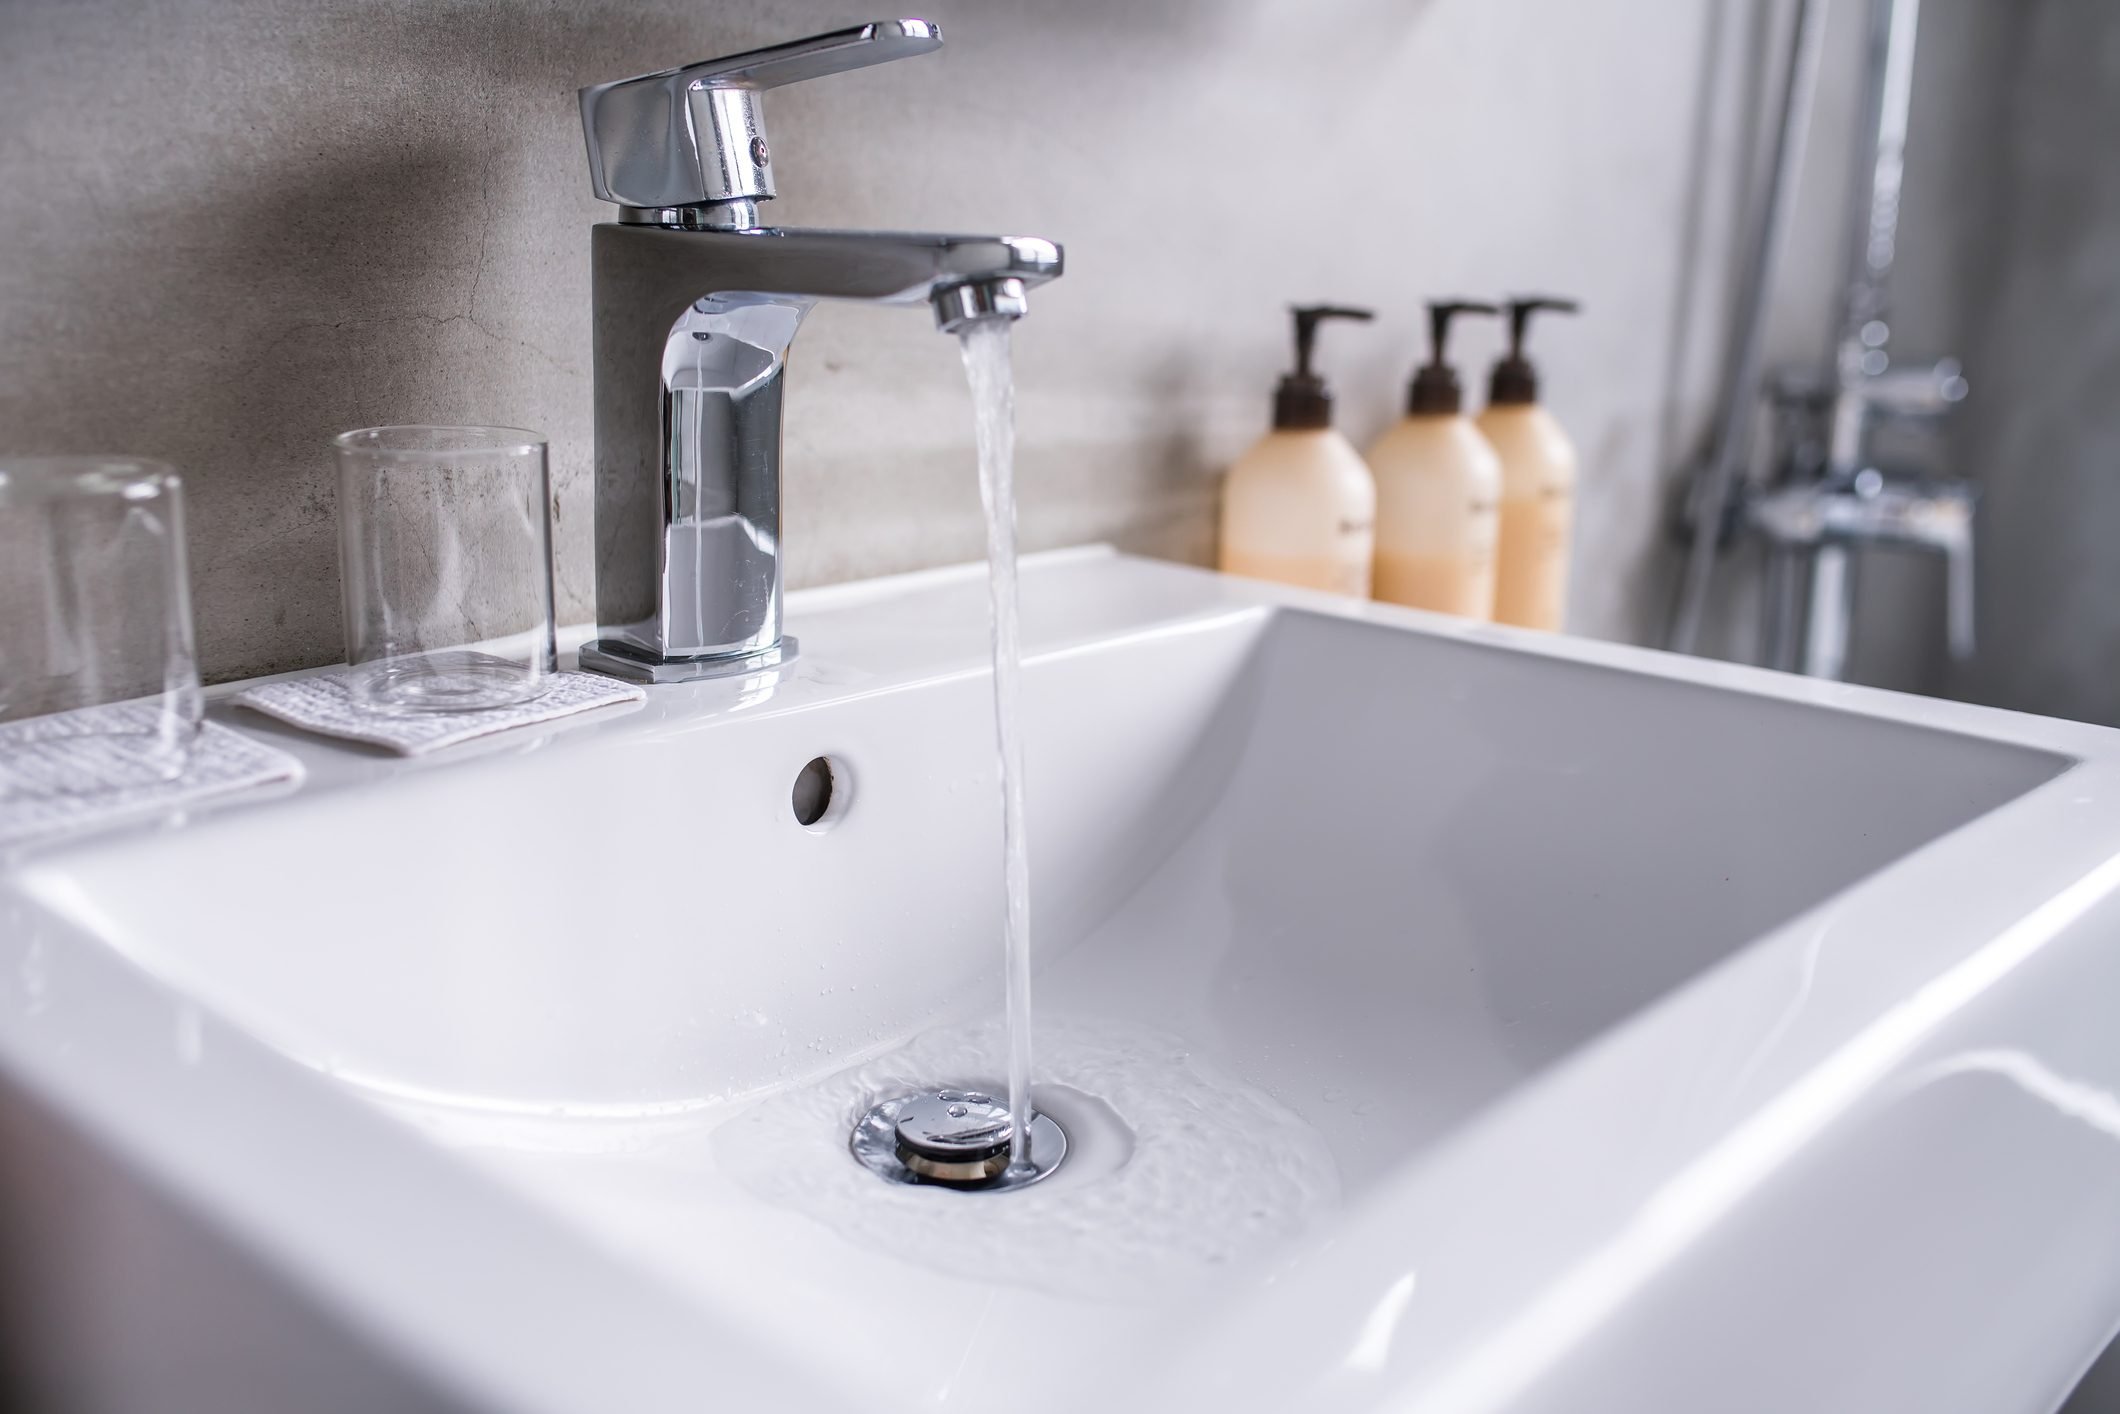 How to Unclog a Drain Without Harsh Chemicals